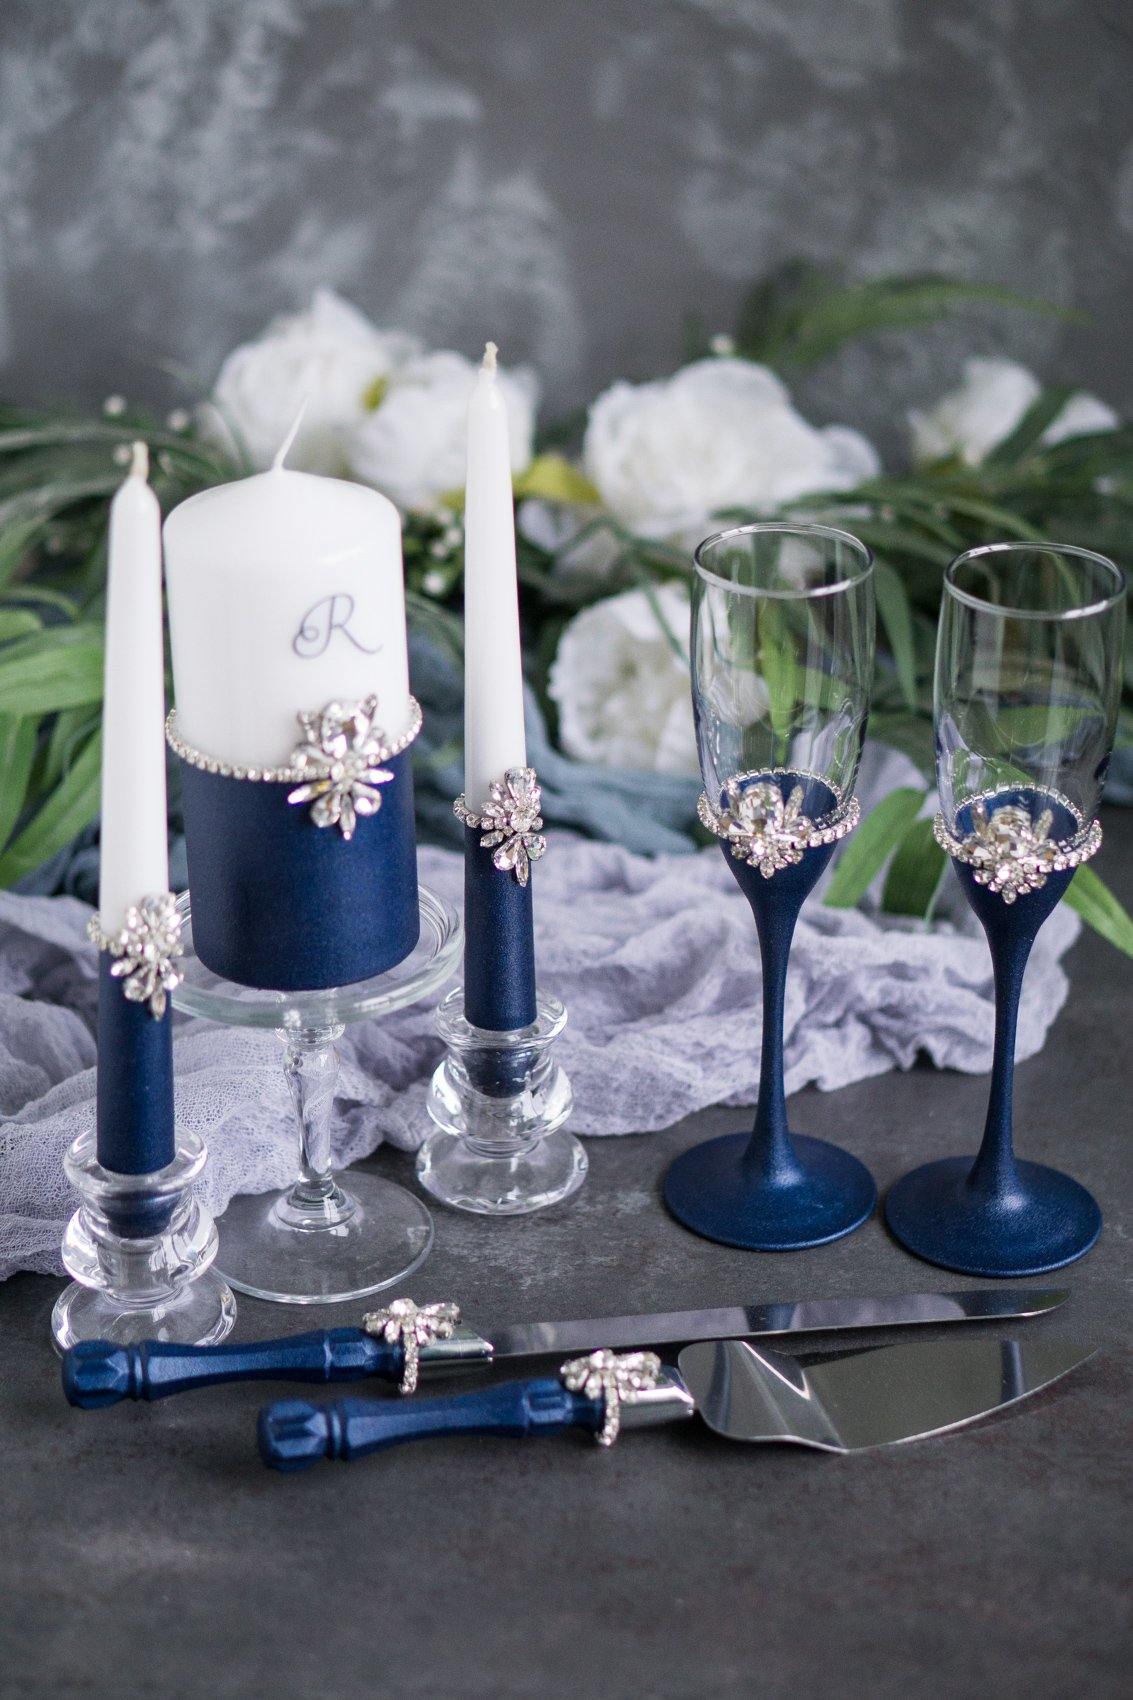 Engagement Ring Wedding Accessories Set - Crystal-Decorated Champagne  Glasses, Cake Server, and More – DiAmoreDS